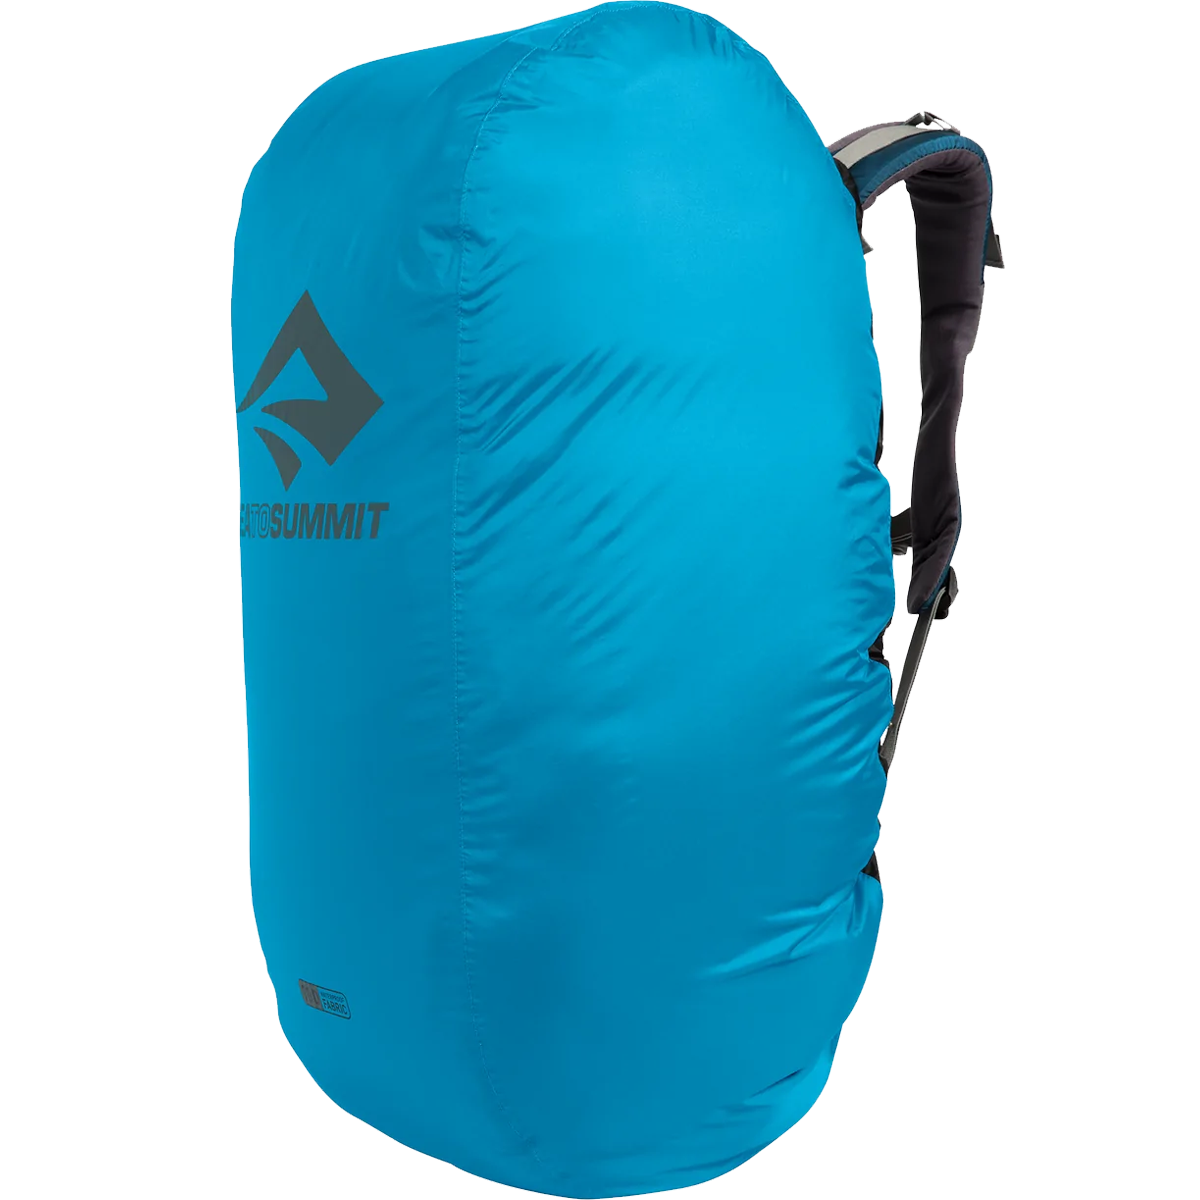 Large Pack Cover 70L to 90L alternate view